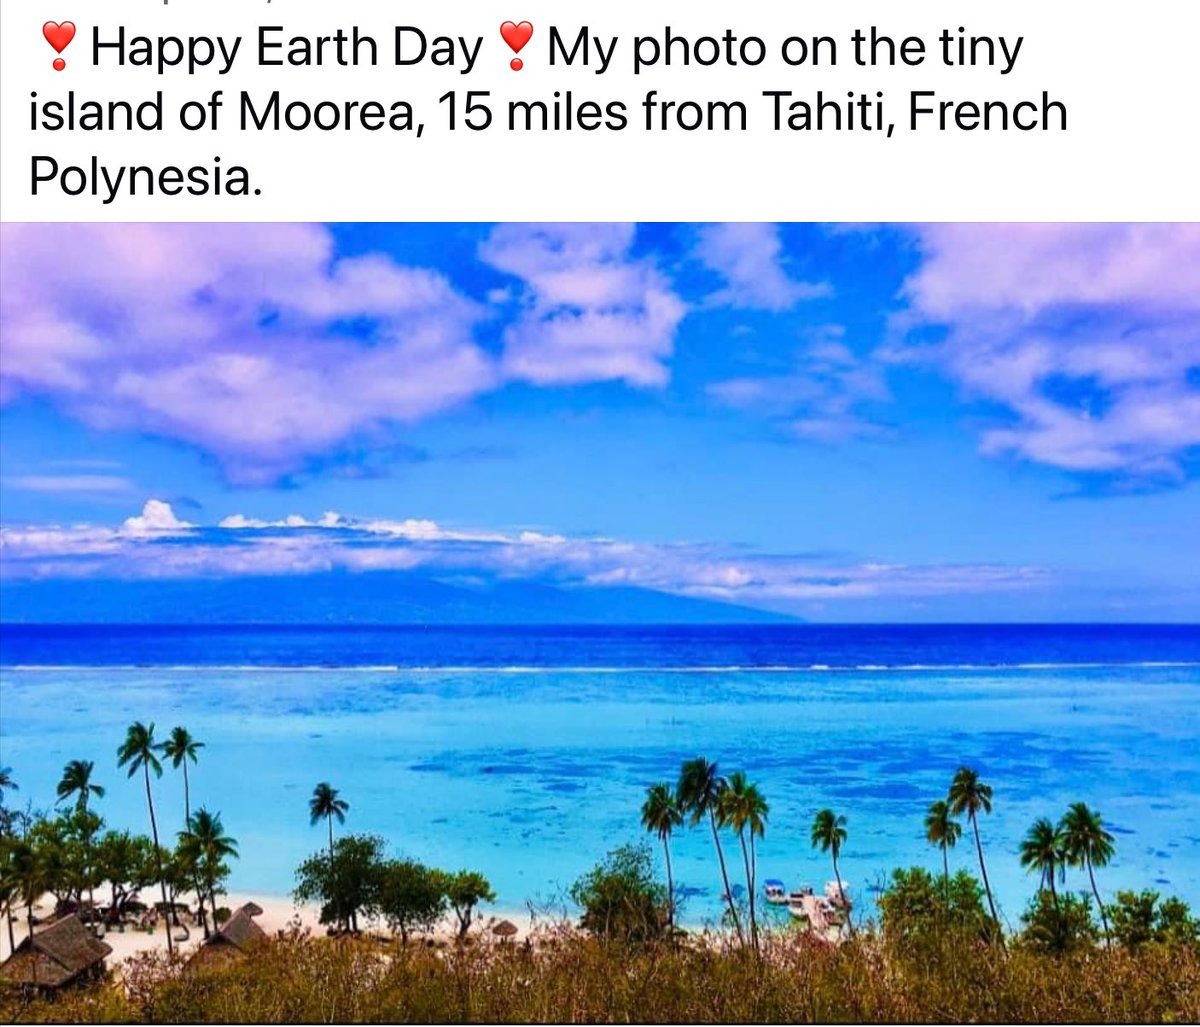 Happy #Earth Day‼️
let’s try to save our planet 
for future generations 

#HaikuChallenge #earth
#haiku @Bleu_Owl
#FrenchPolynesia
#Moorea #MyPhoto
#copyrightArtsySF©️
#photography
#EarthDay